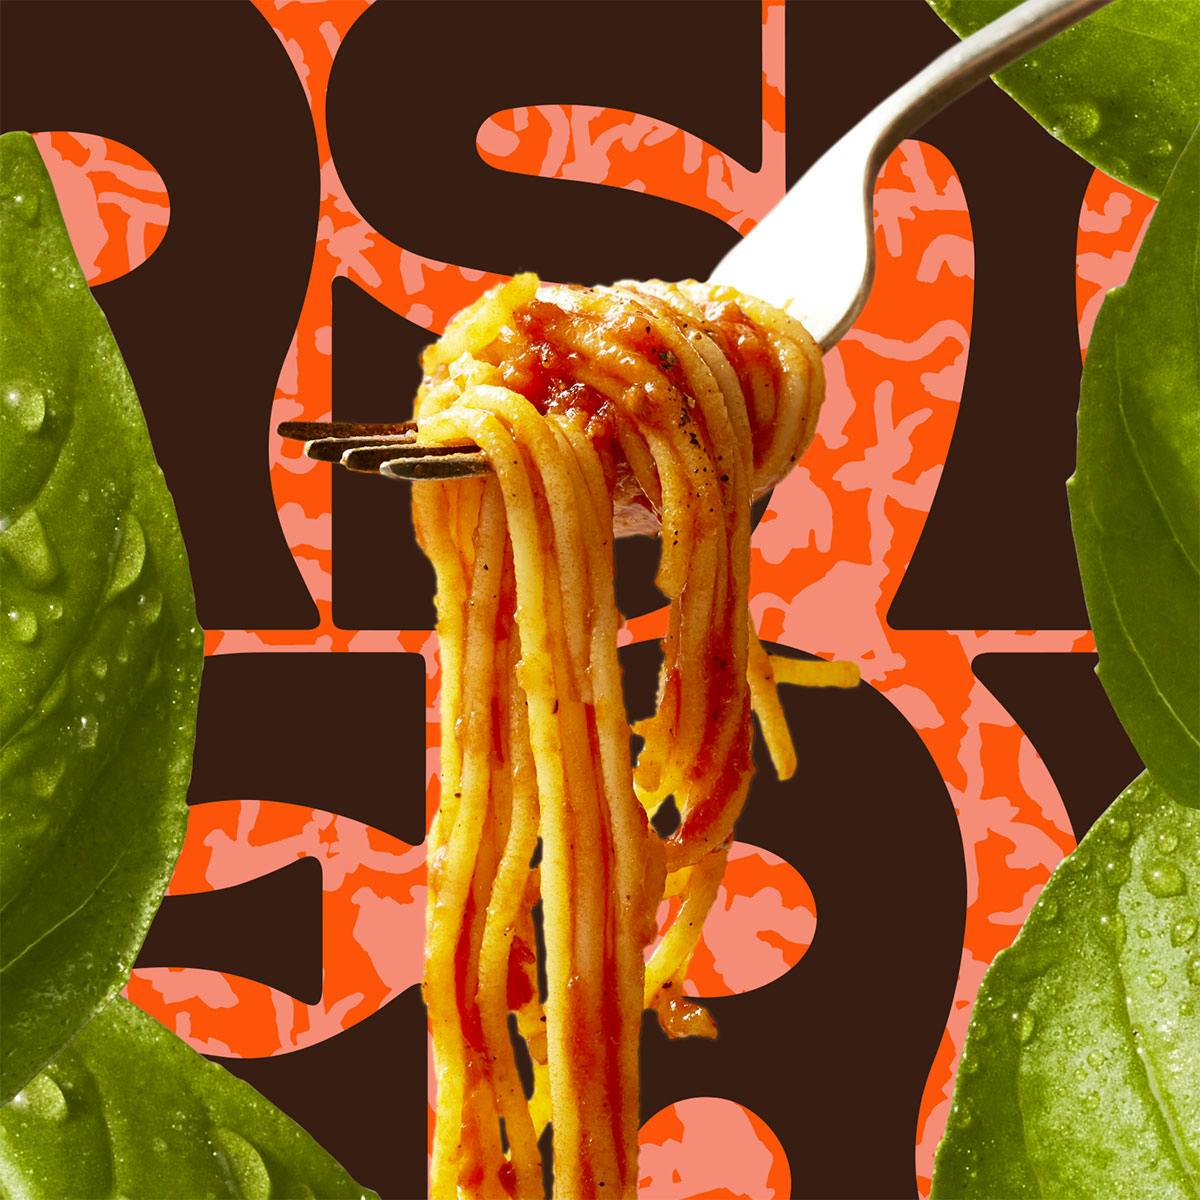 Image shows a cut-out image of a forkful of spaghetti